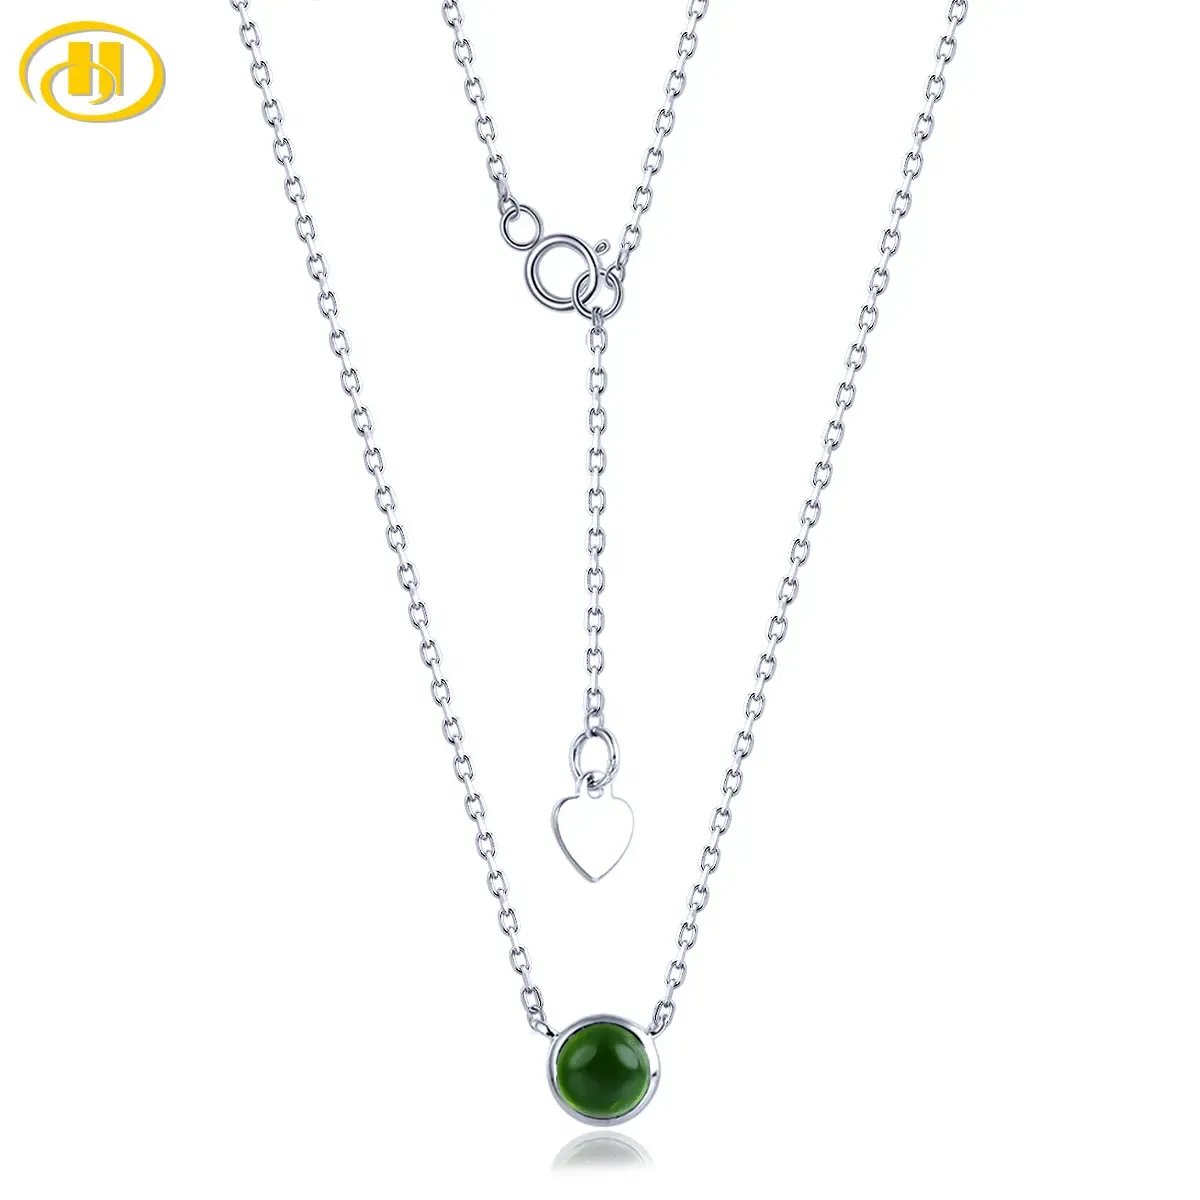 Pendants Natural Chrome Diopside Sterling Silver Women's Pendant Lovely Style Round 5mm Cabochon Cutting S925 Fine Jewelrys Gifts